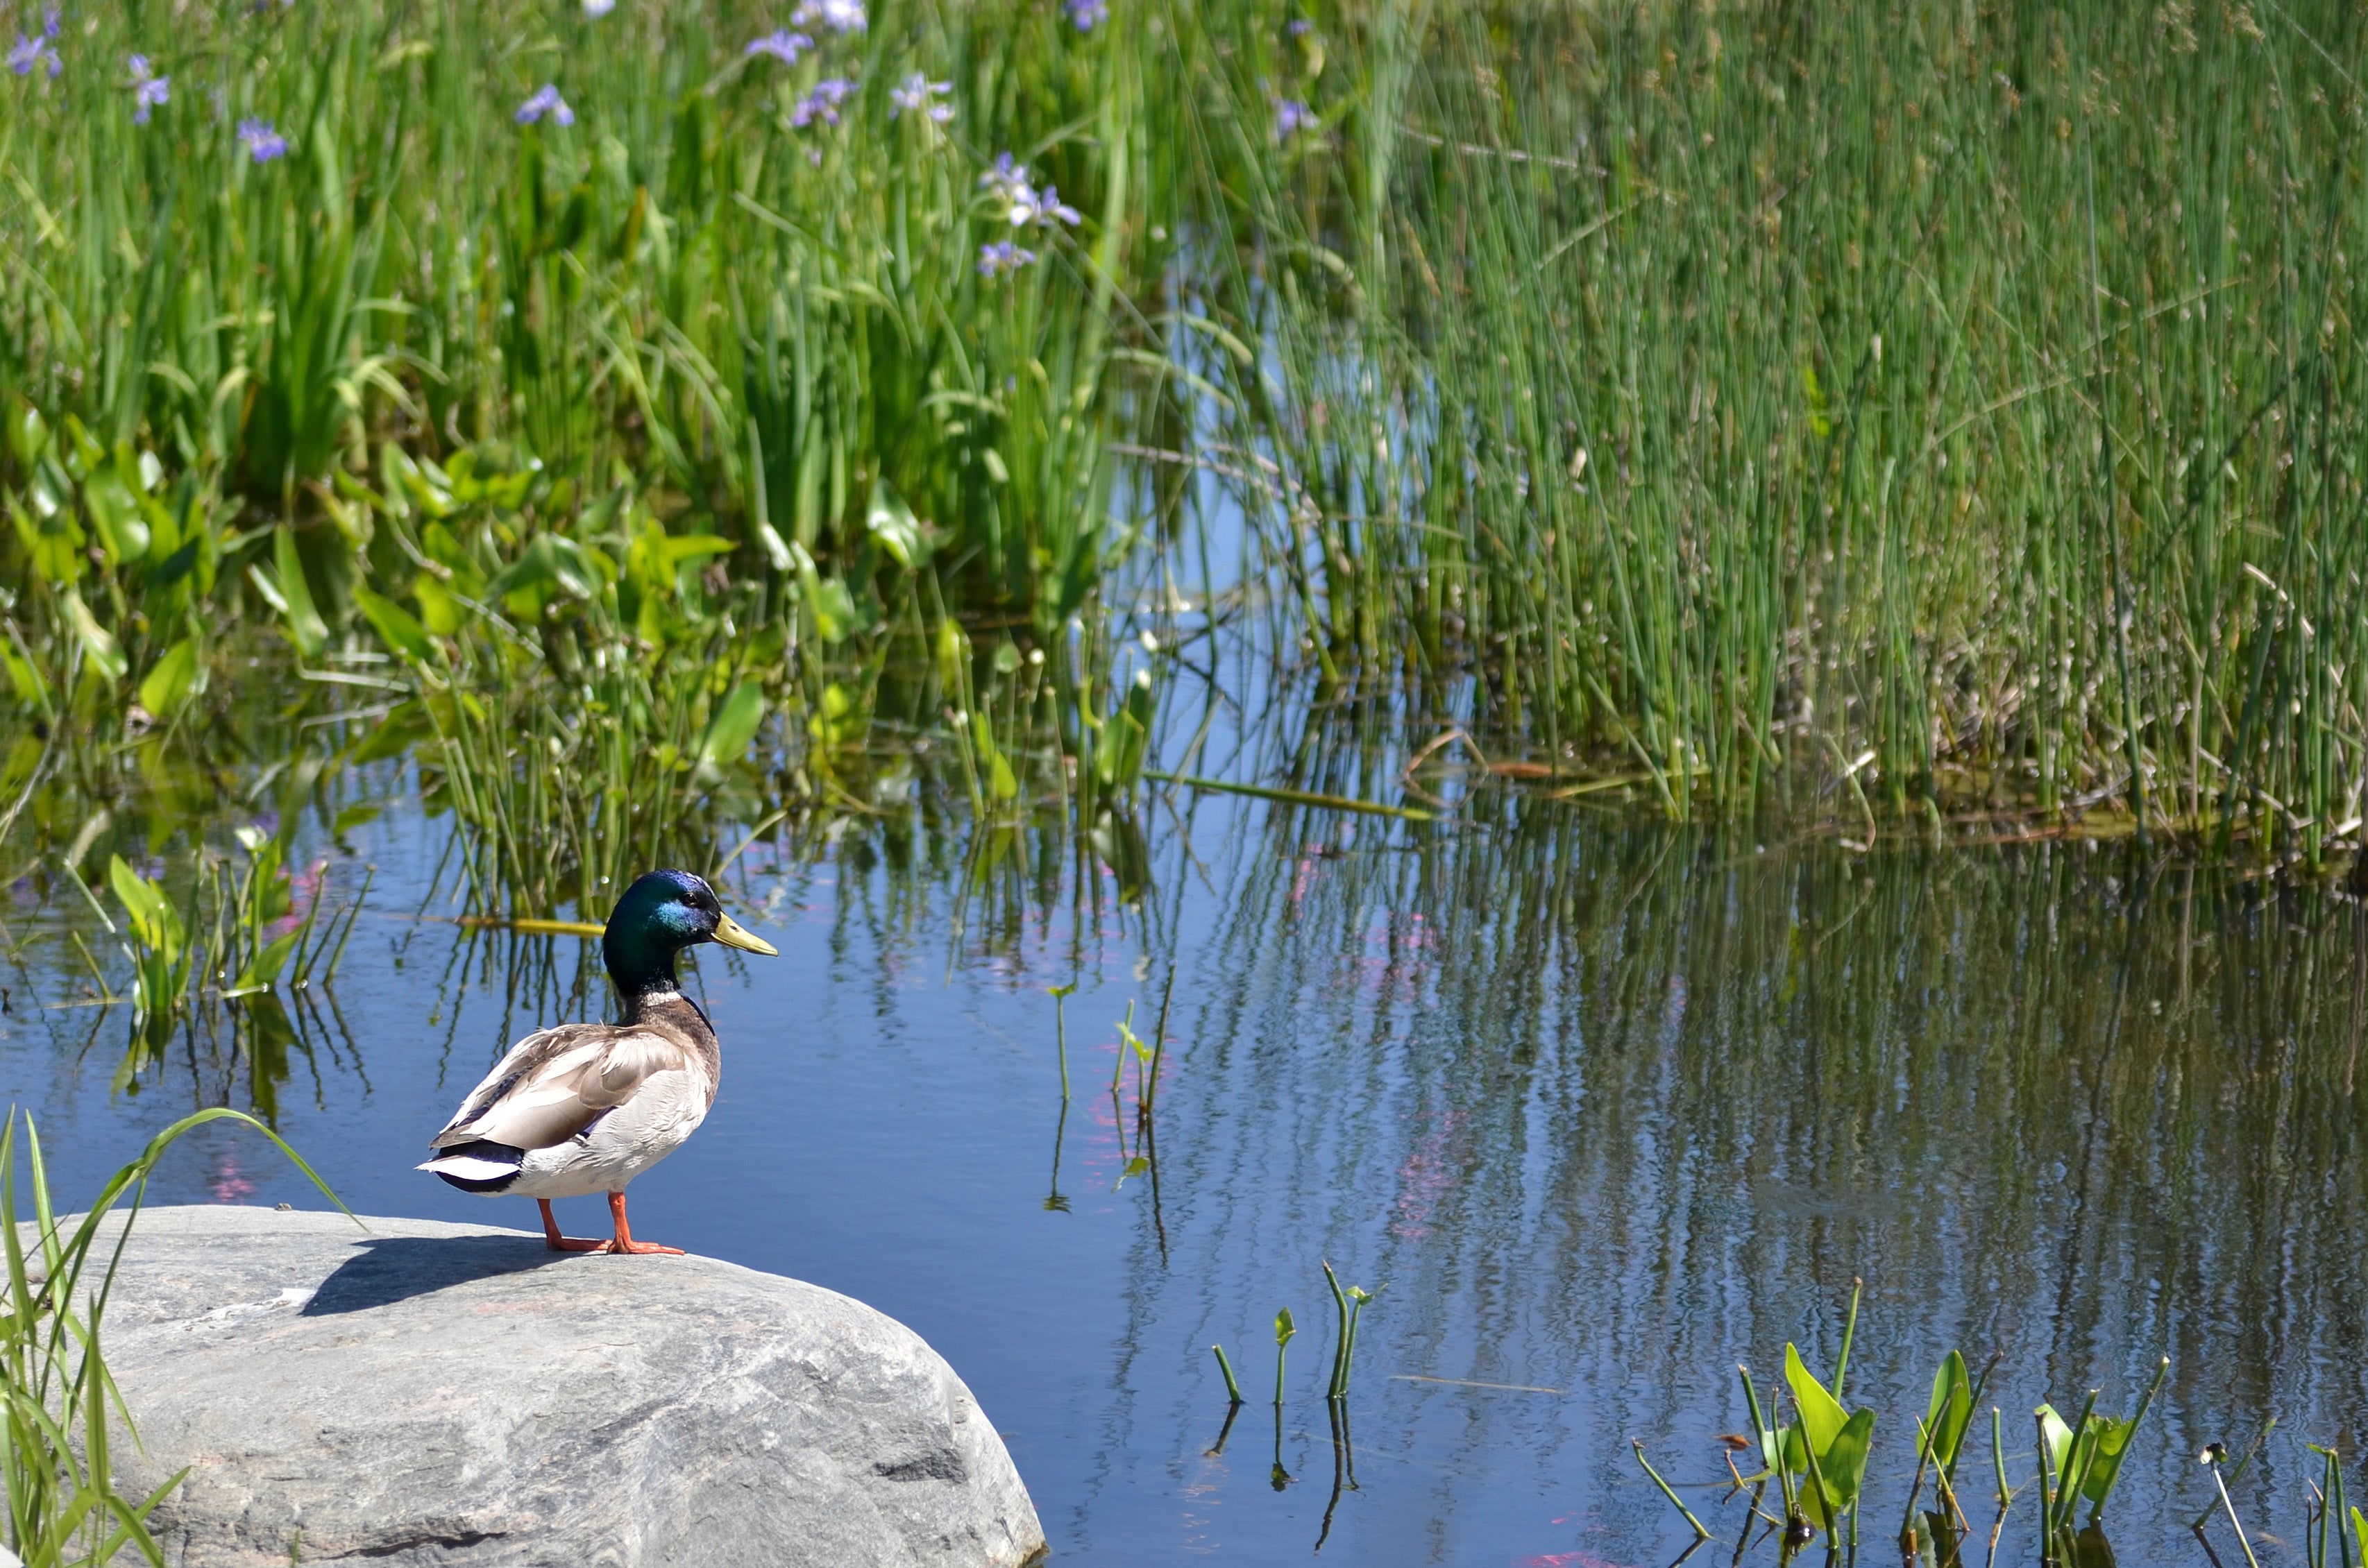 A duck perched at the edge of the extensive marsh in Corktown Common